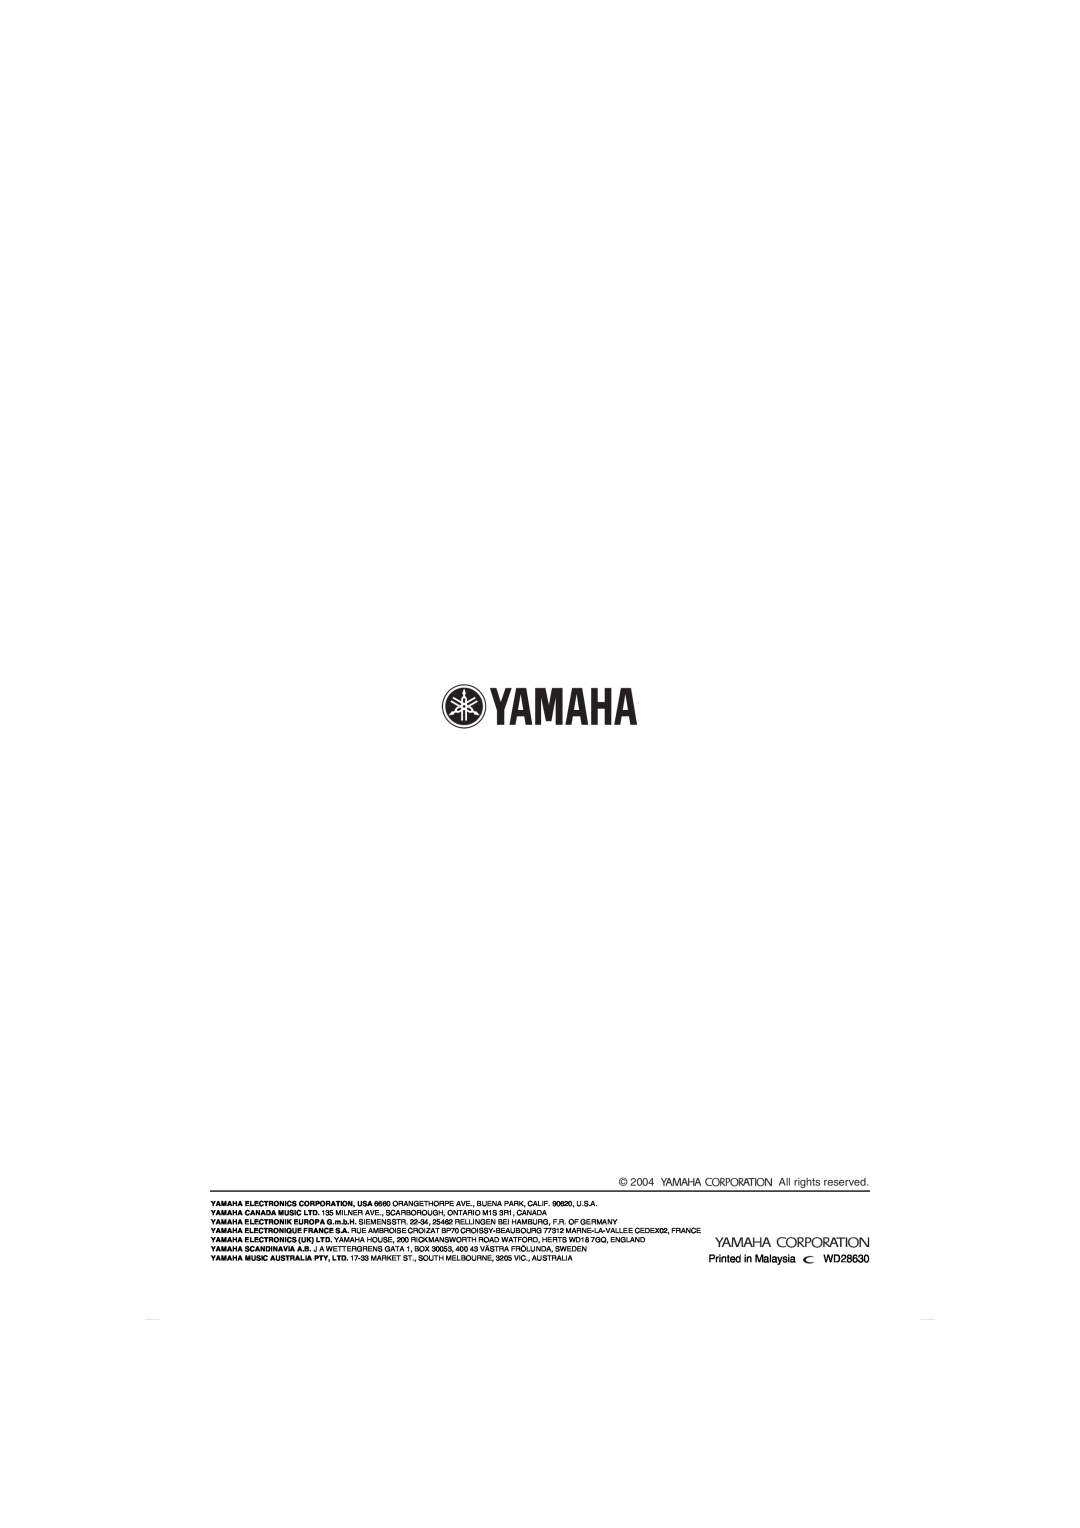 Yamaha MCX-CA15 owner manual 2004, All rights reserved, WD28630 